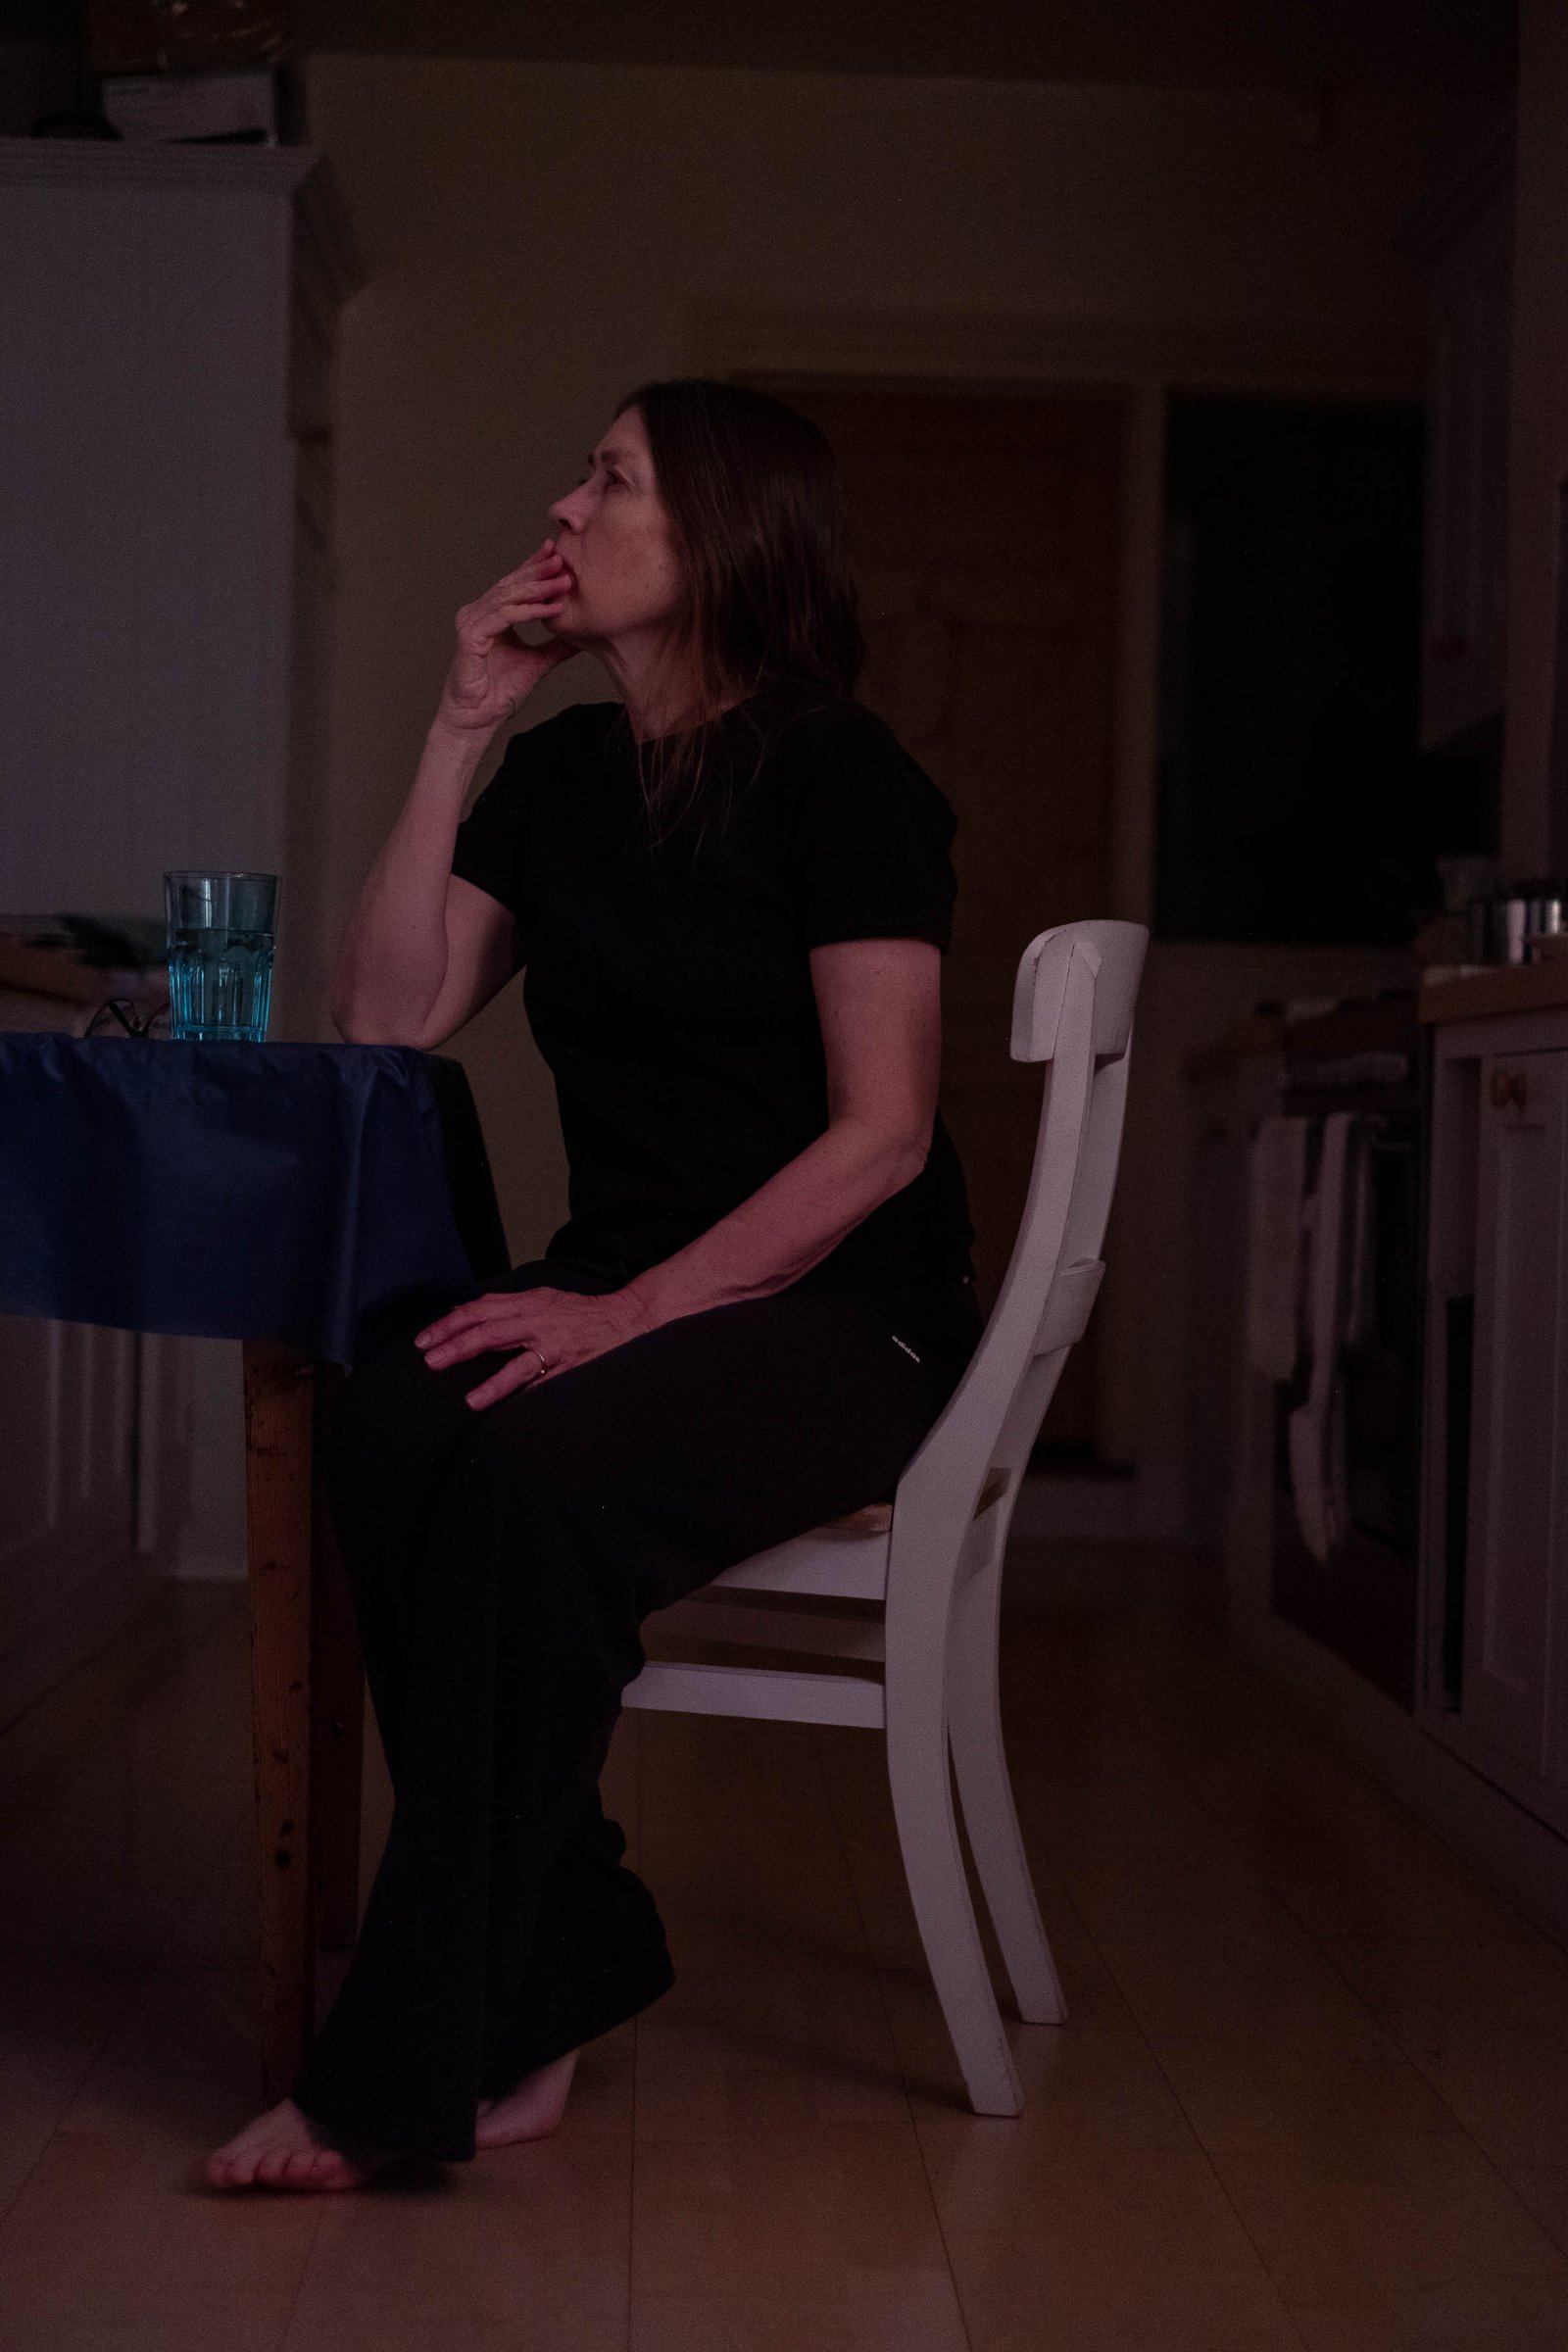 A woman dressed in black sits at a kitchen table in a dark room, gazing upwards as if lost in thought.